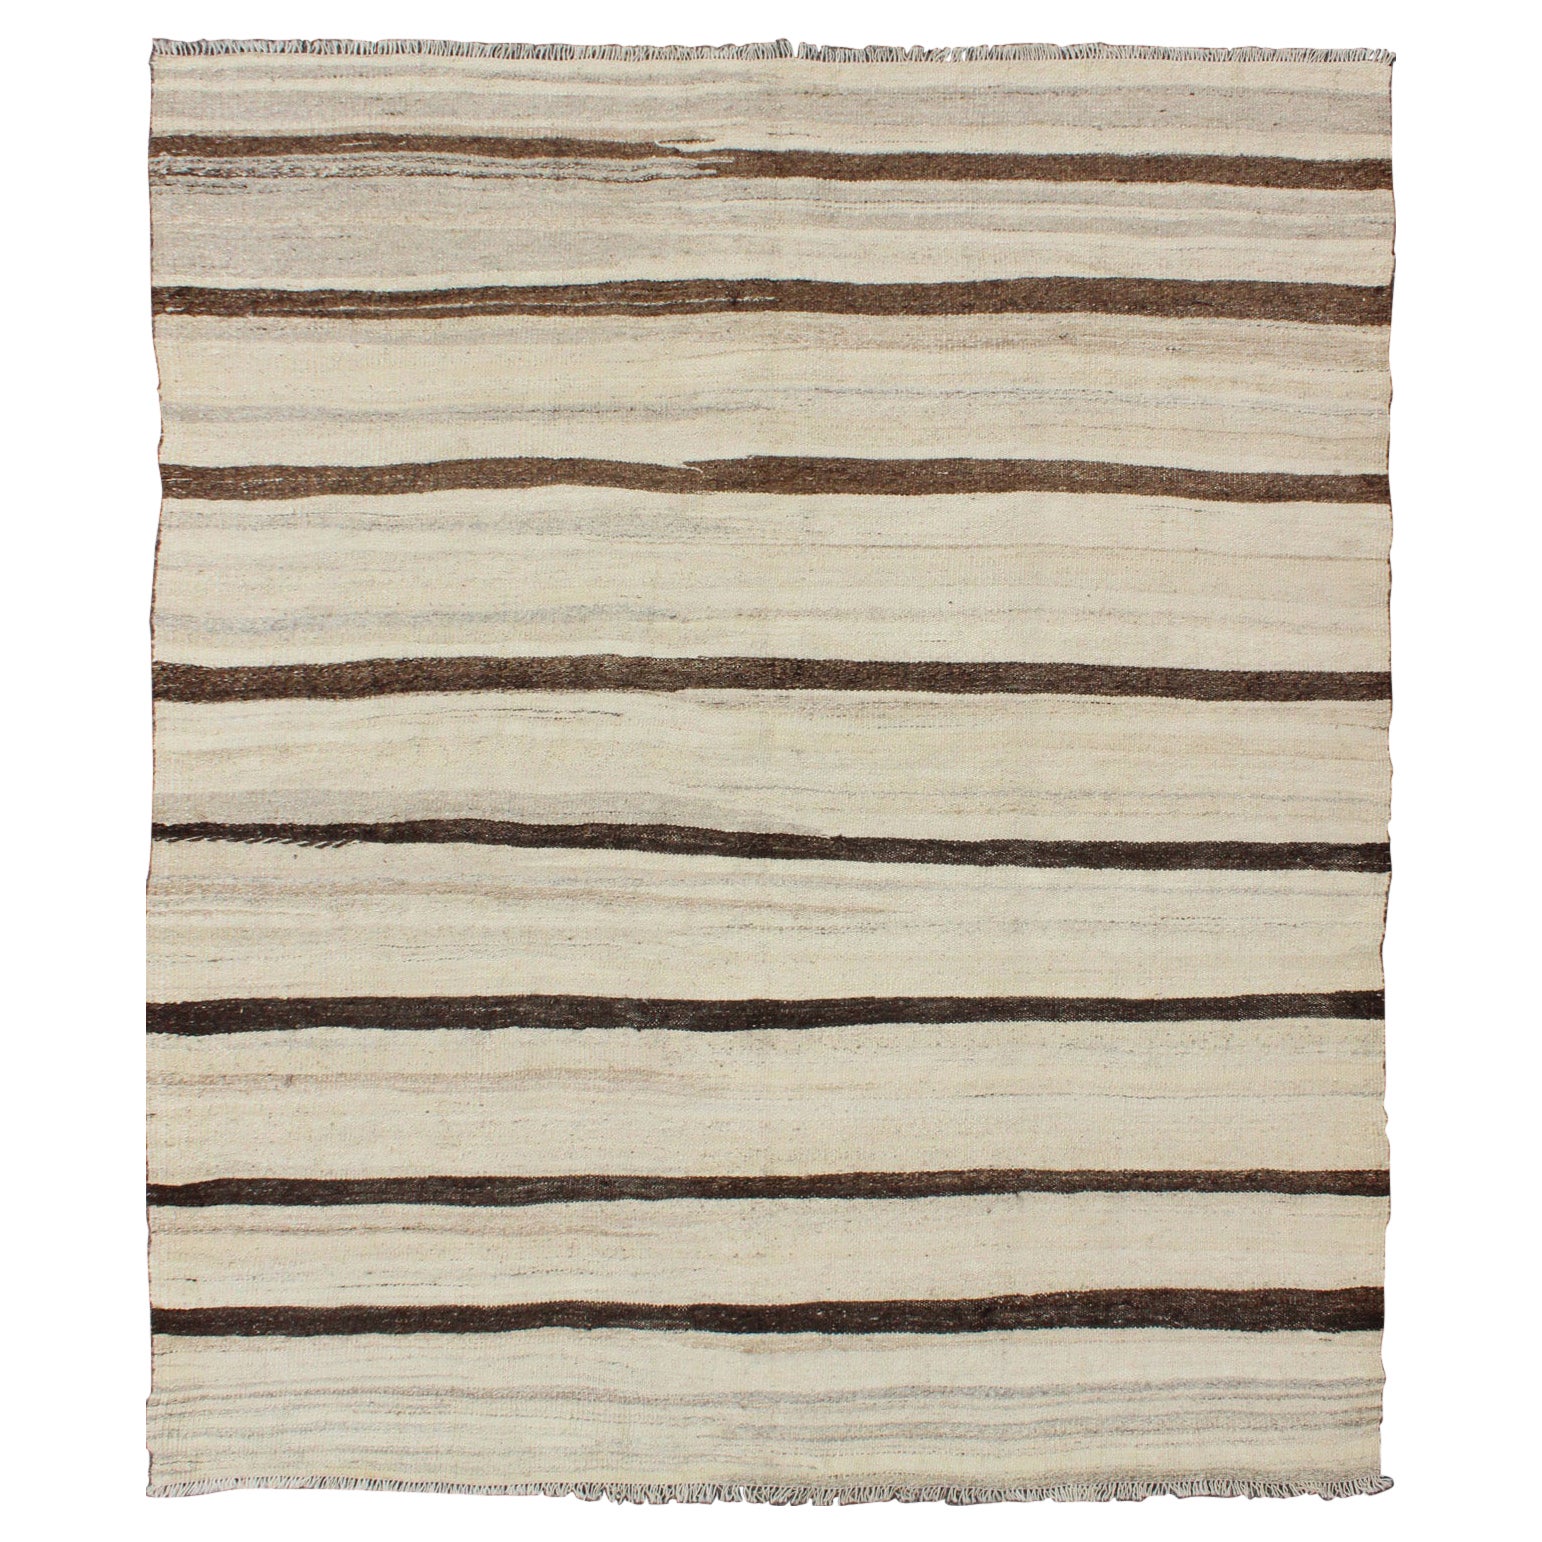 Turkish Vintage Flat-Weave in Light Brown and Cream with Stripe Design